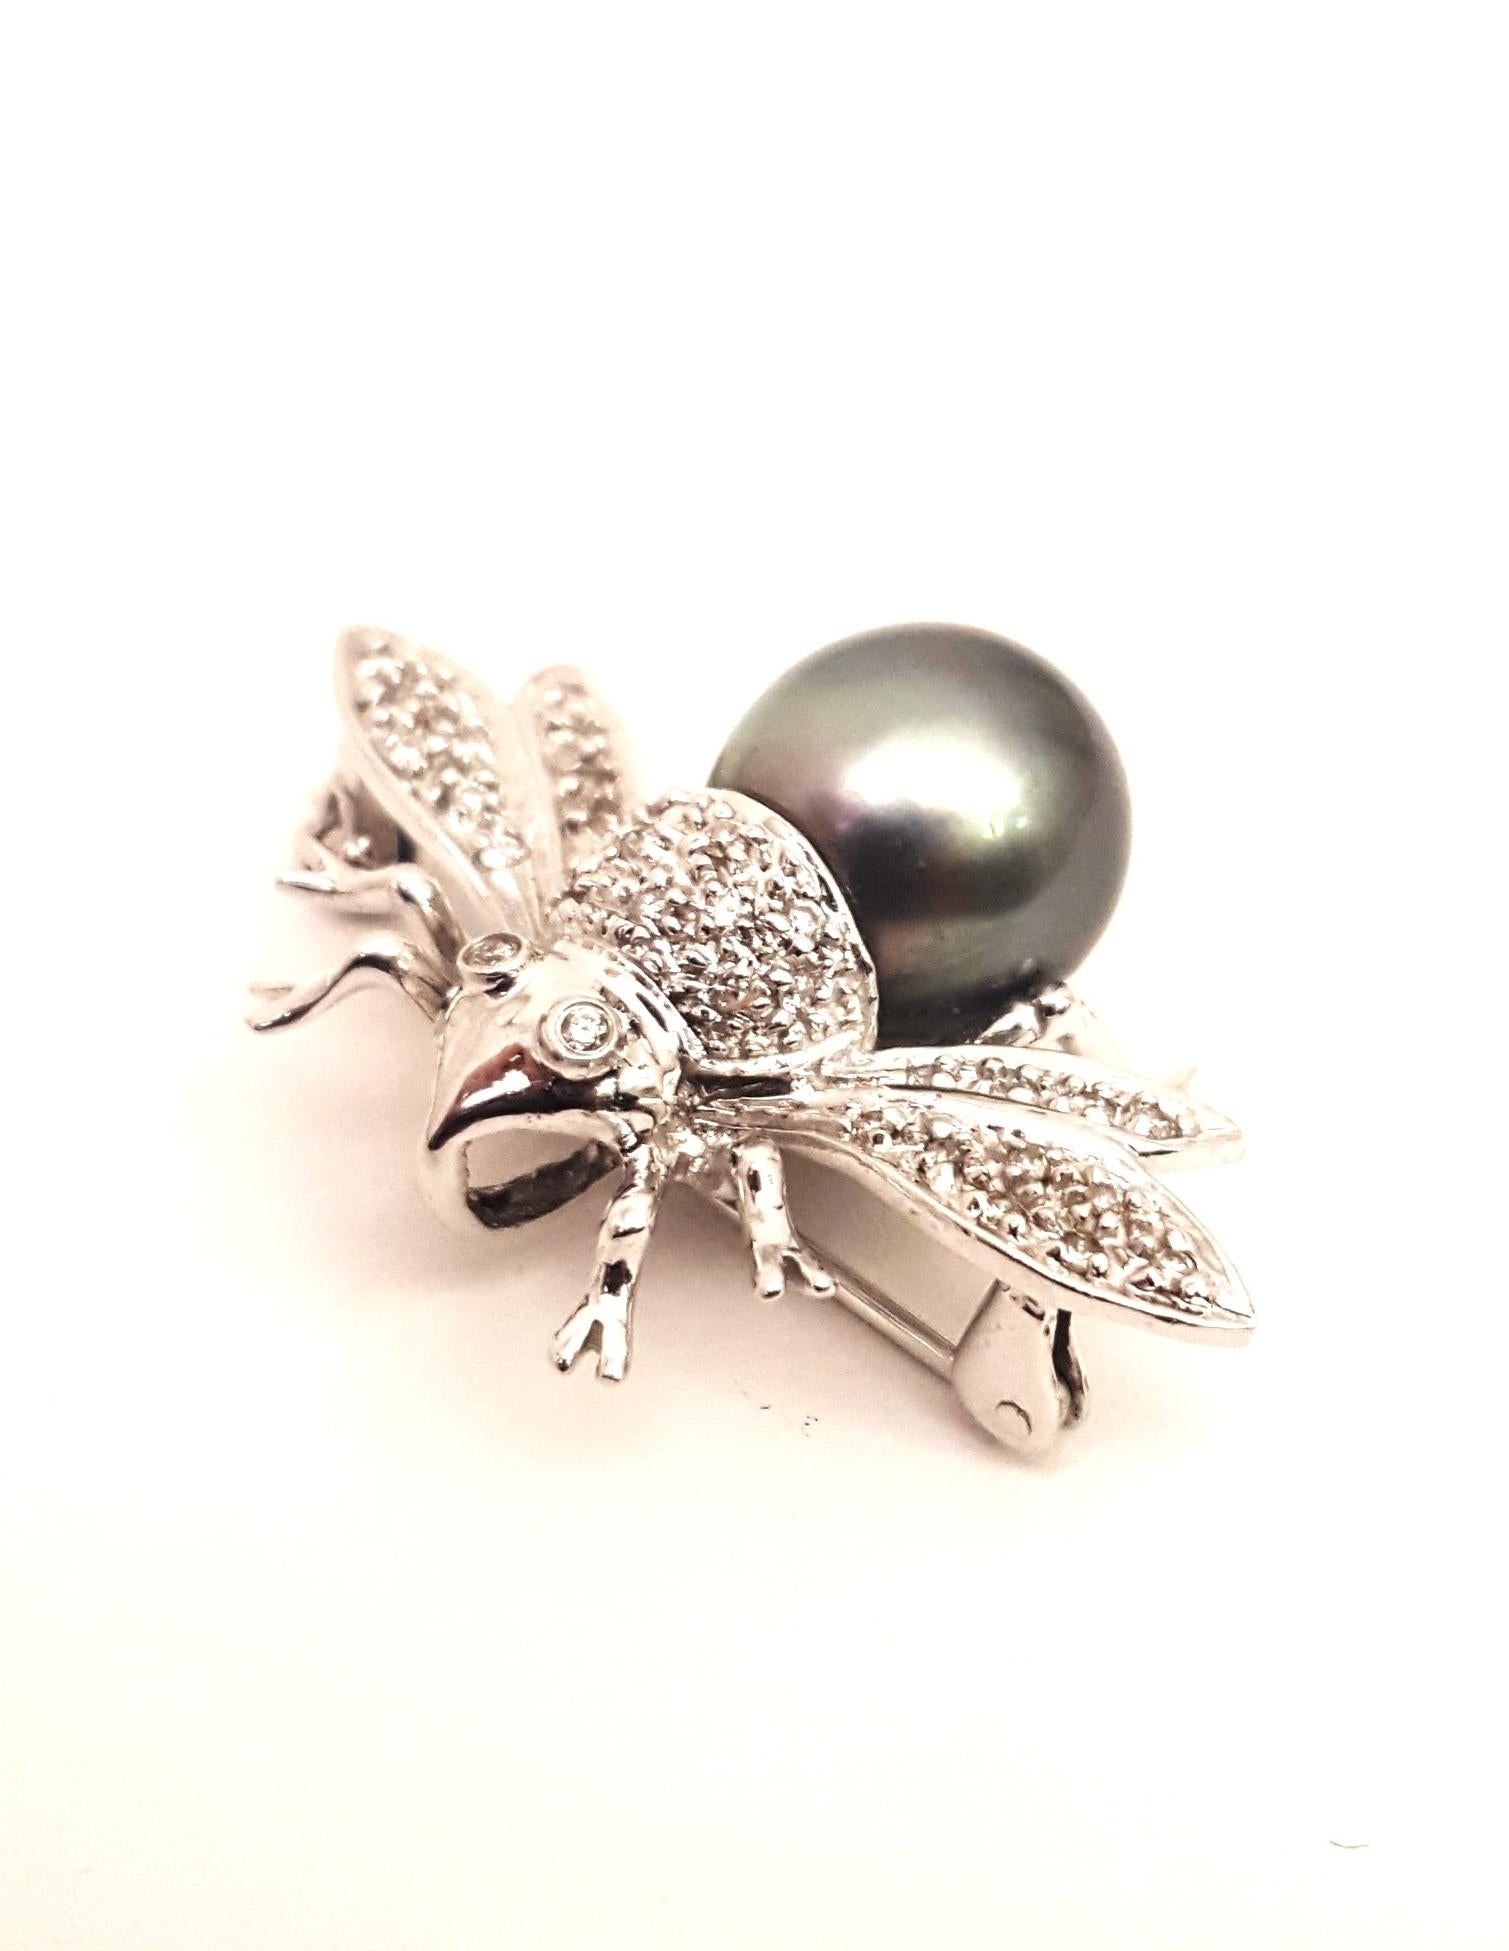 This darling bee brooch would be a fabulous addition to your fine jewelry collection!  Crafted in both sterling silver and 14 karat white gold, the body sports a faux black pearl measuring 11 mm wide.  Top of body and wings boast white diamonds. 